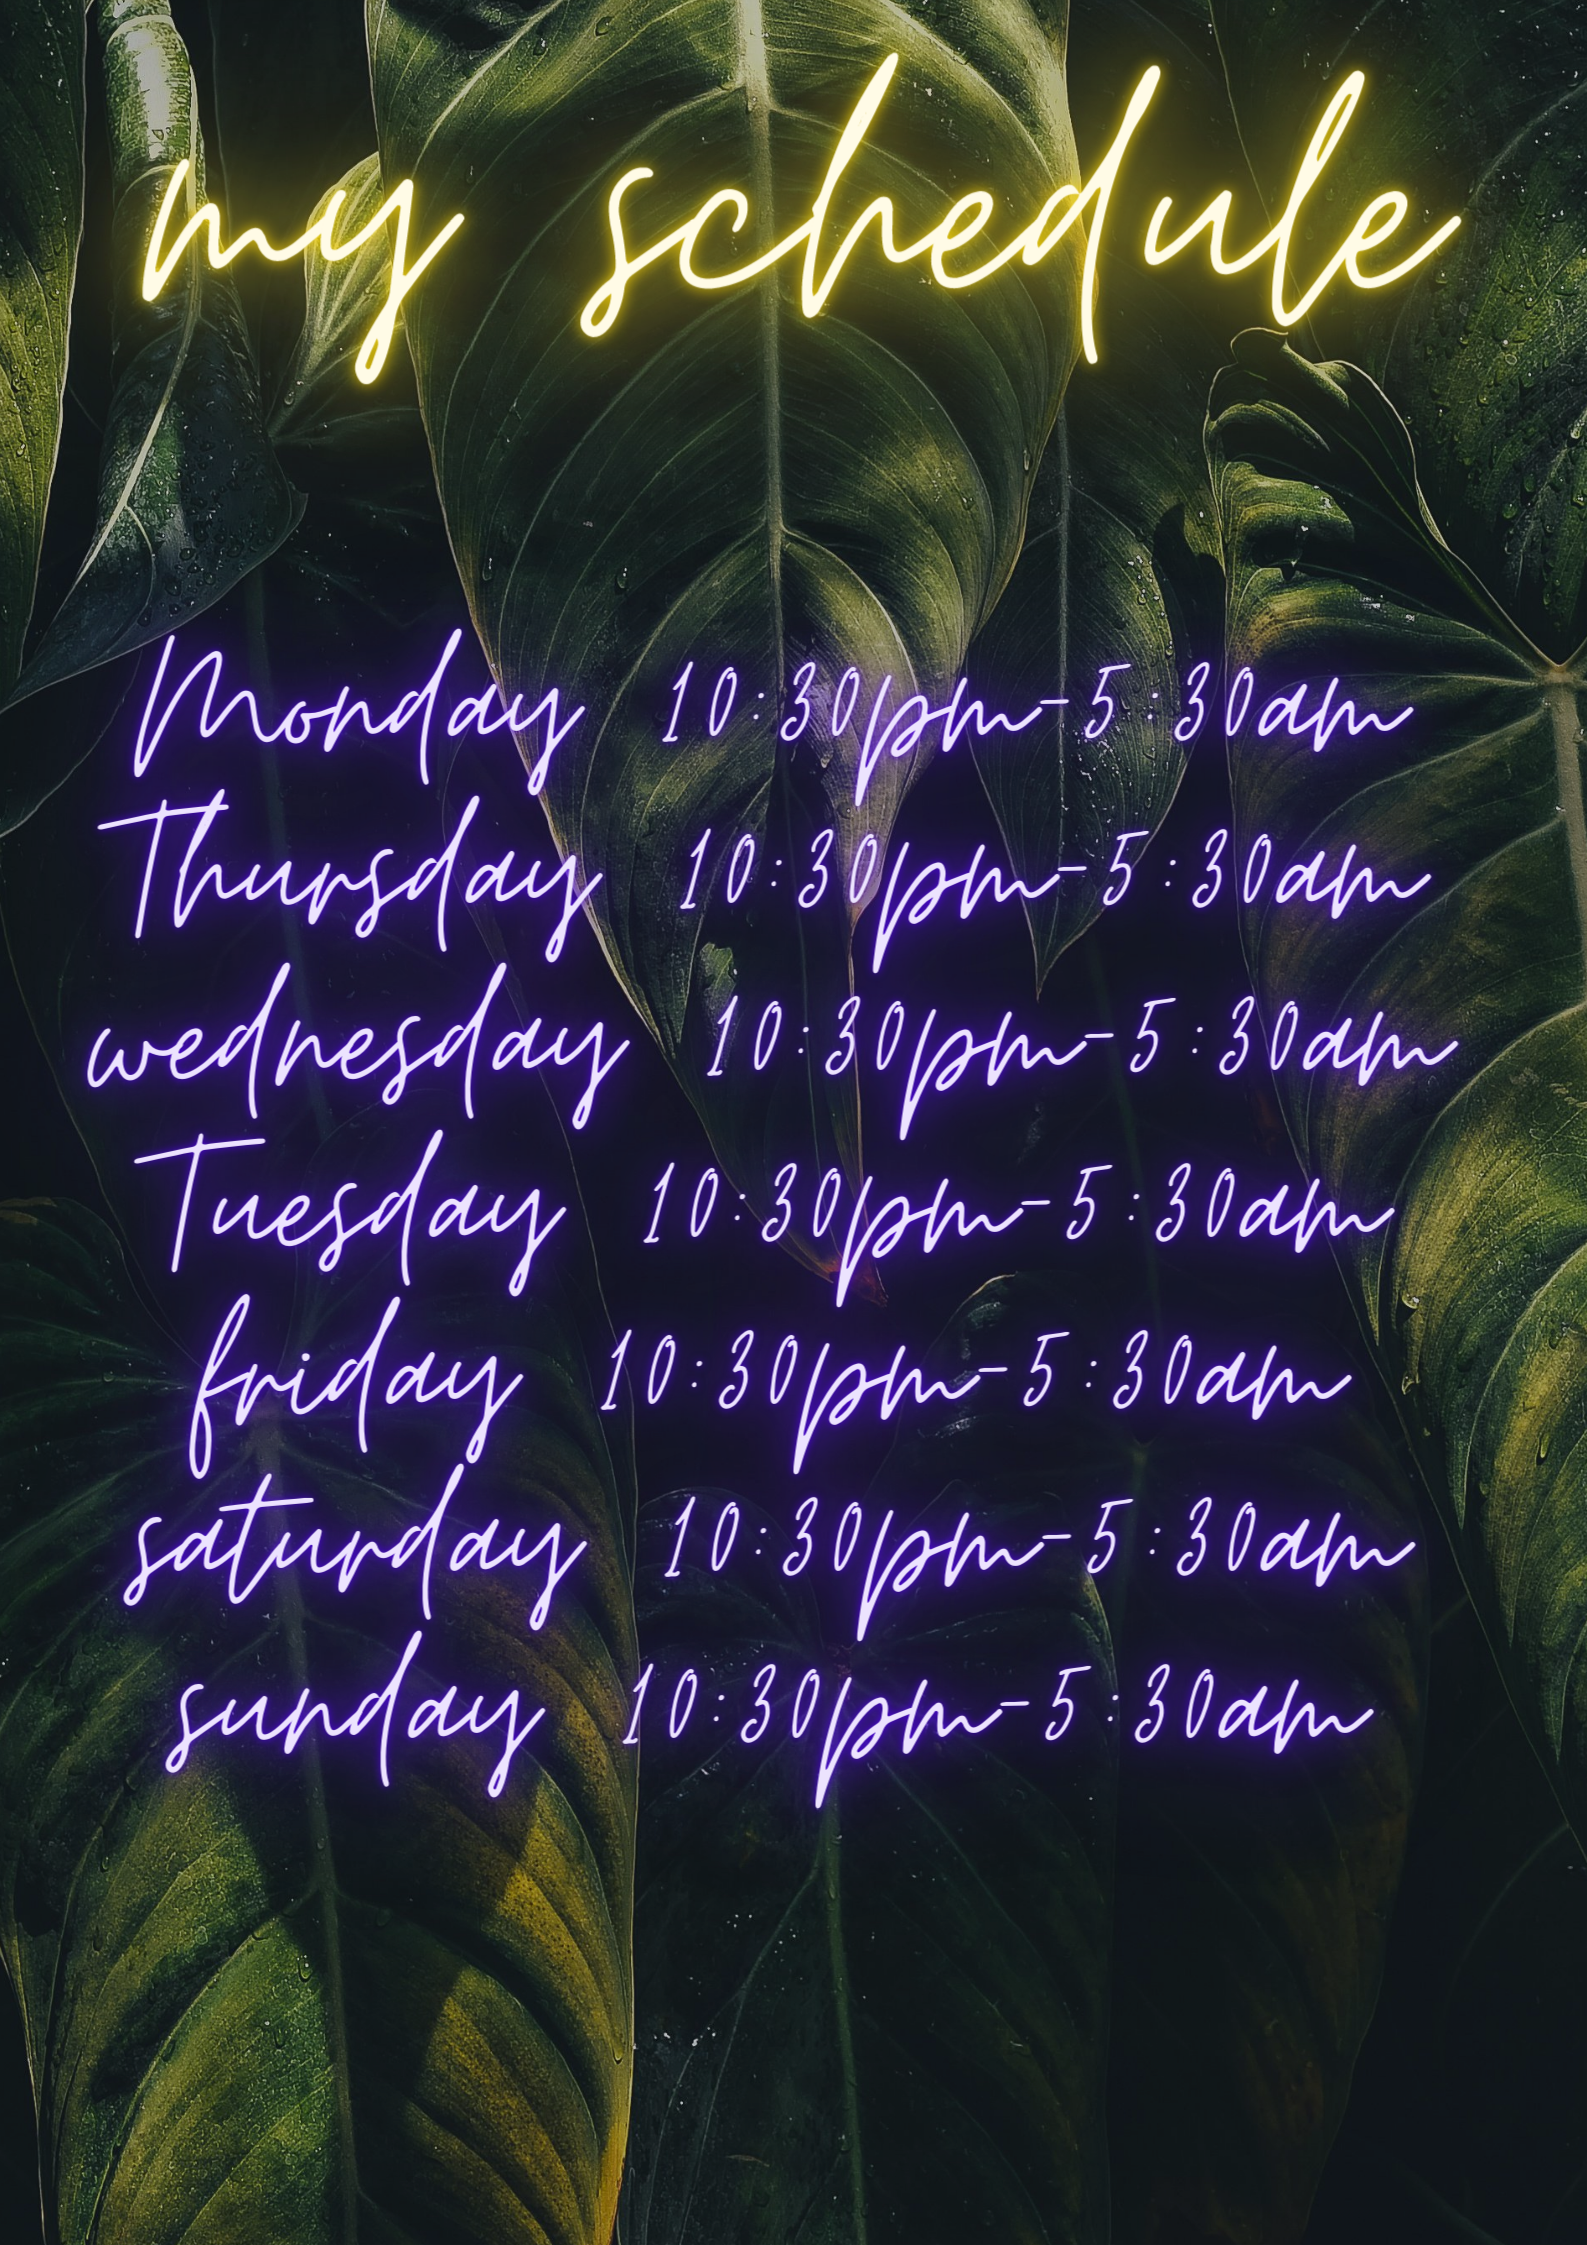 hannahill69 My schedule image: 1